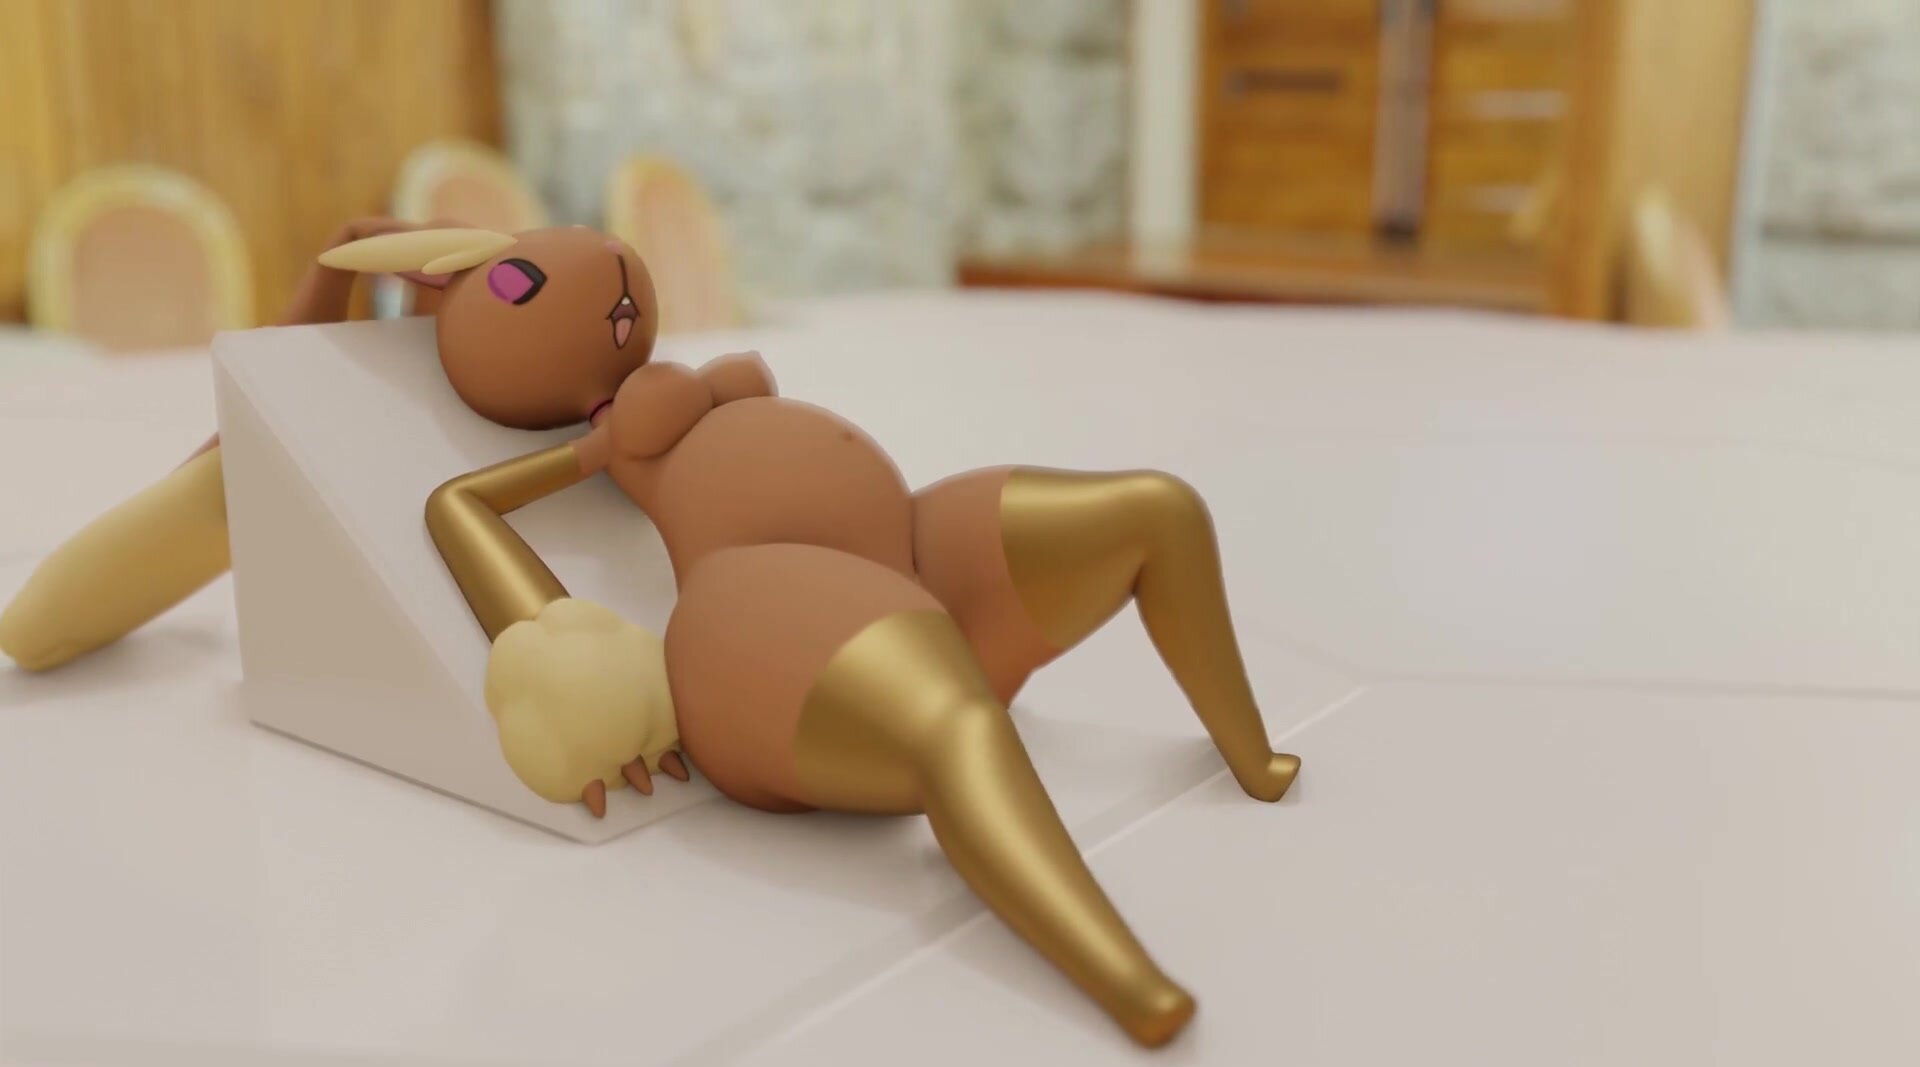 Lopunny's Stomach Trouble